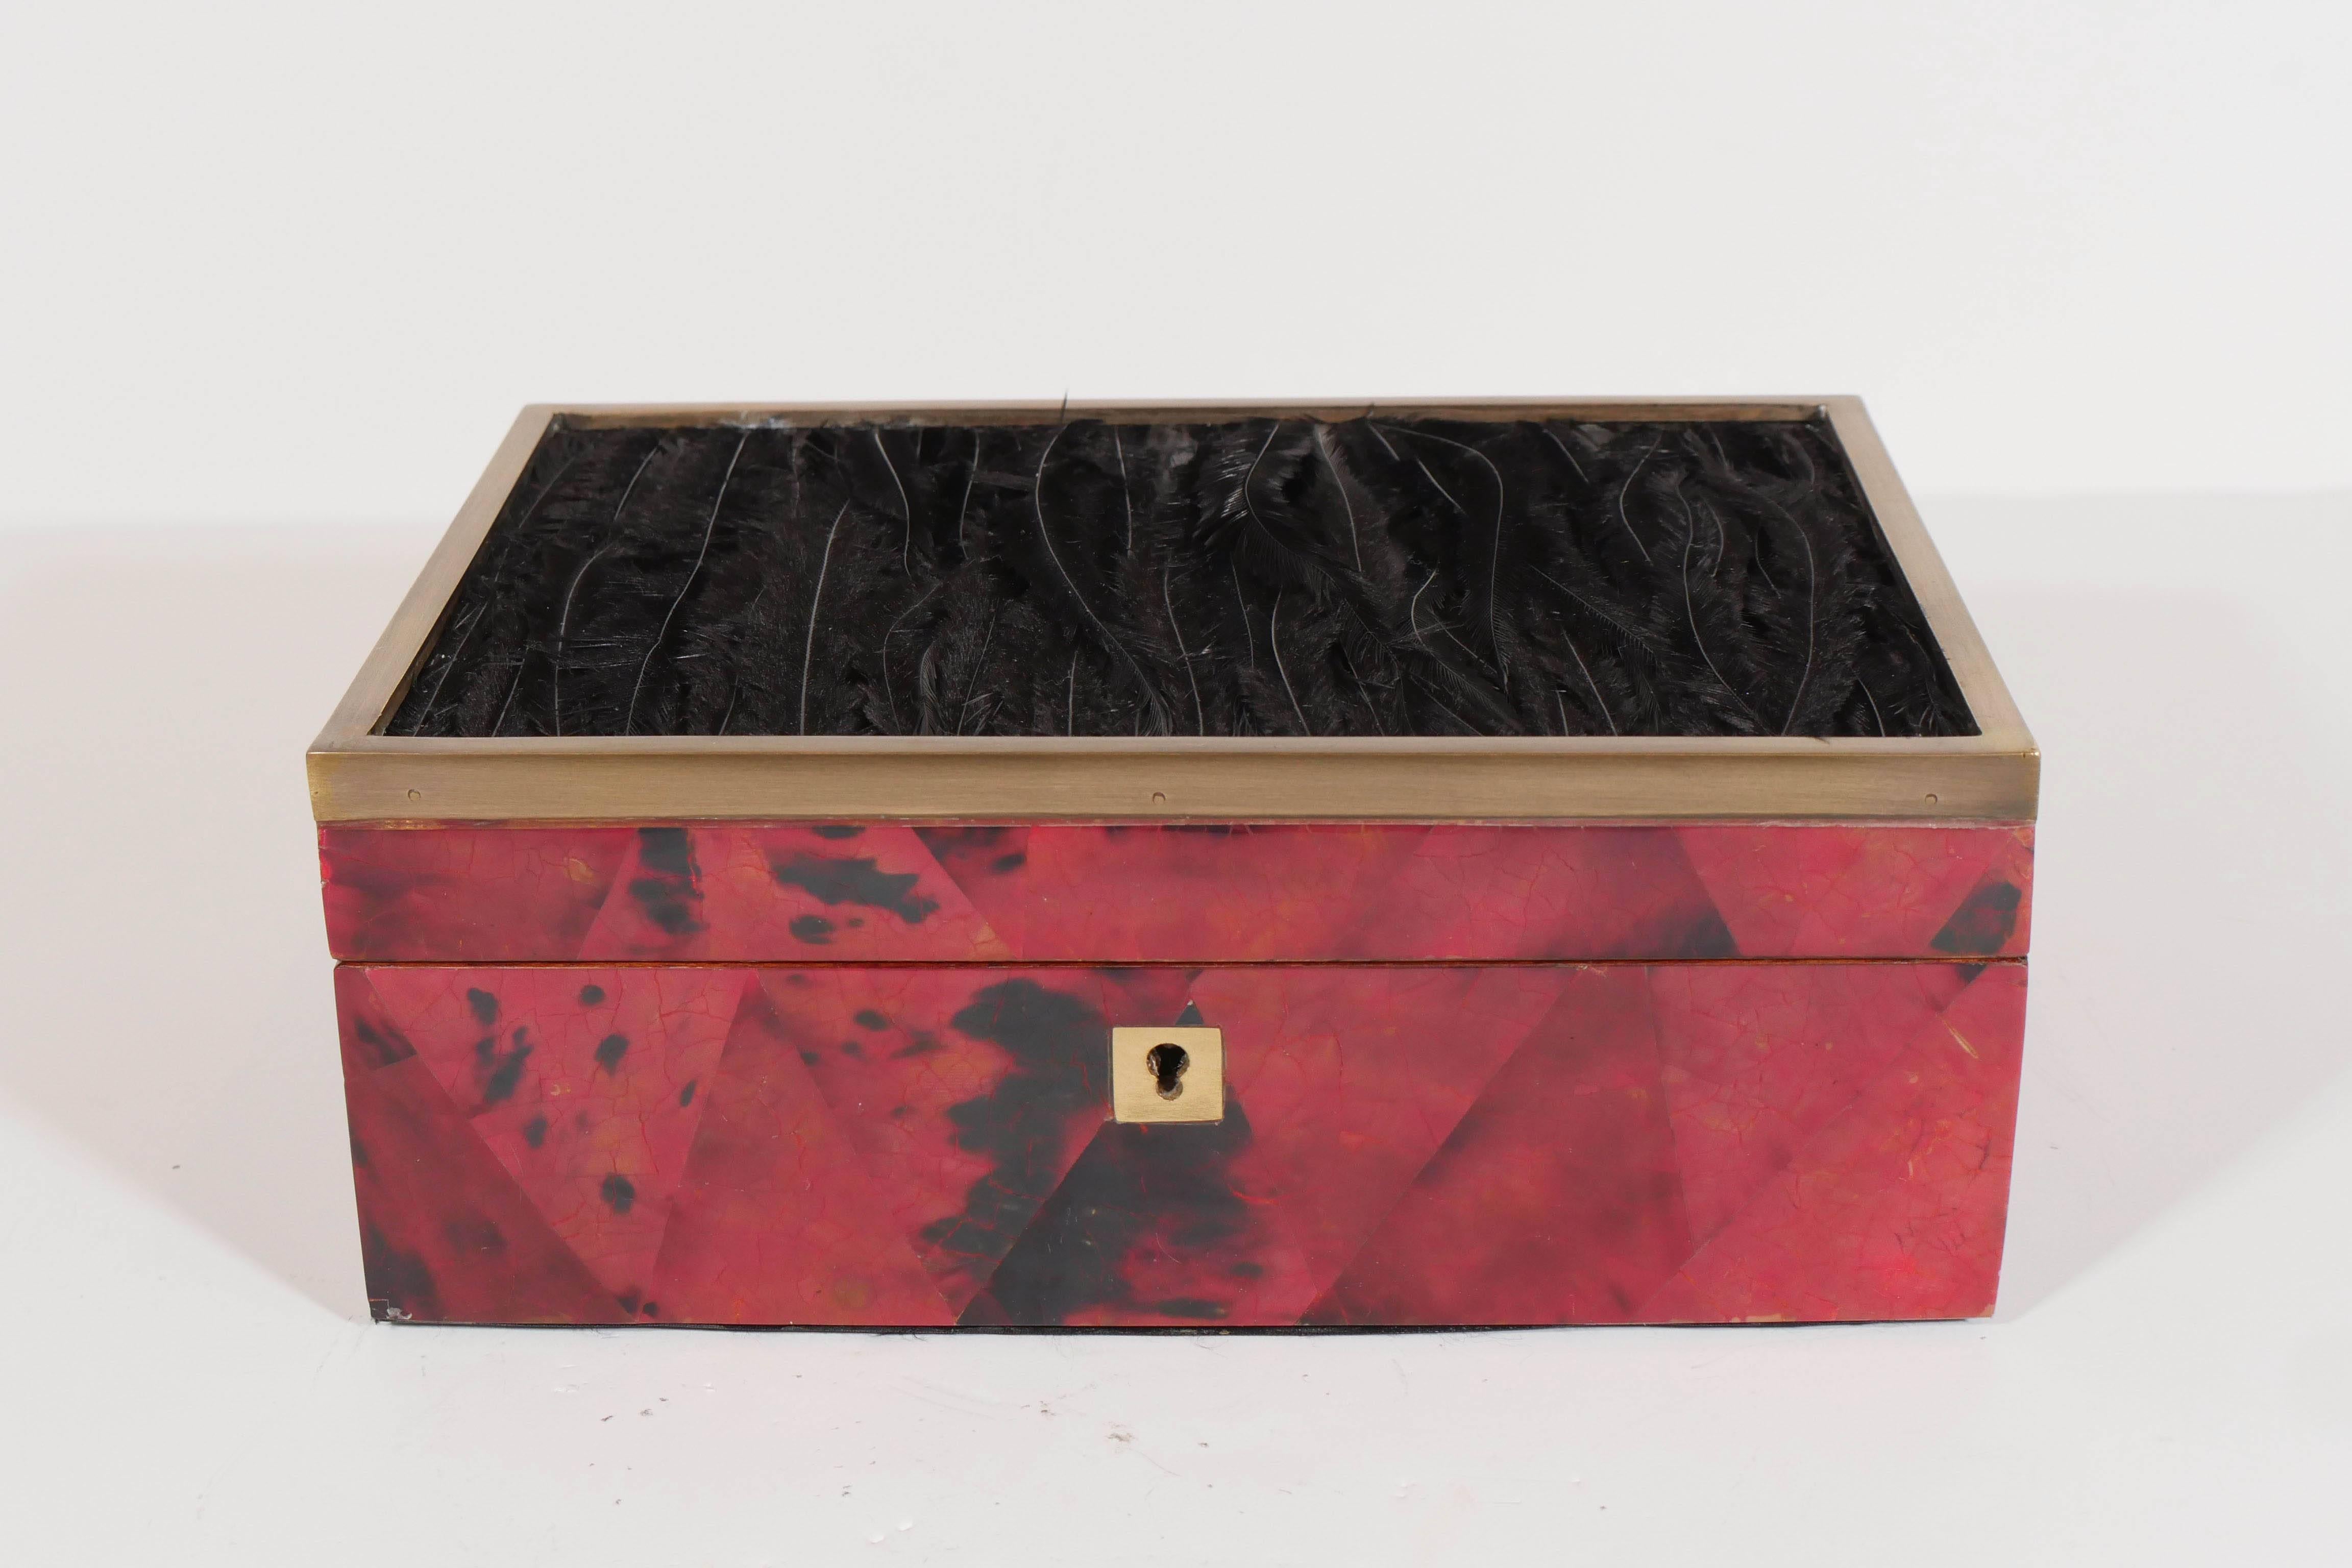 Exquisitely handcrafted jewelry box. Comprised of hand dyed and lacquered pen shell with geometric patterns in hues of ruby and black. The box has an elegant bronze hand-forged trim, and features exotic black bird feathers along the top. Fitted with